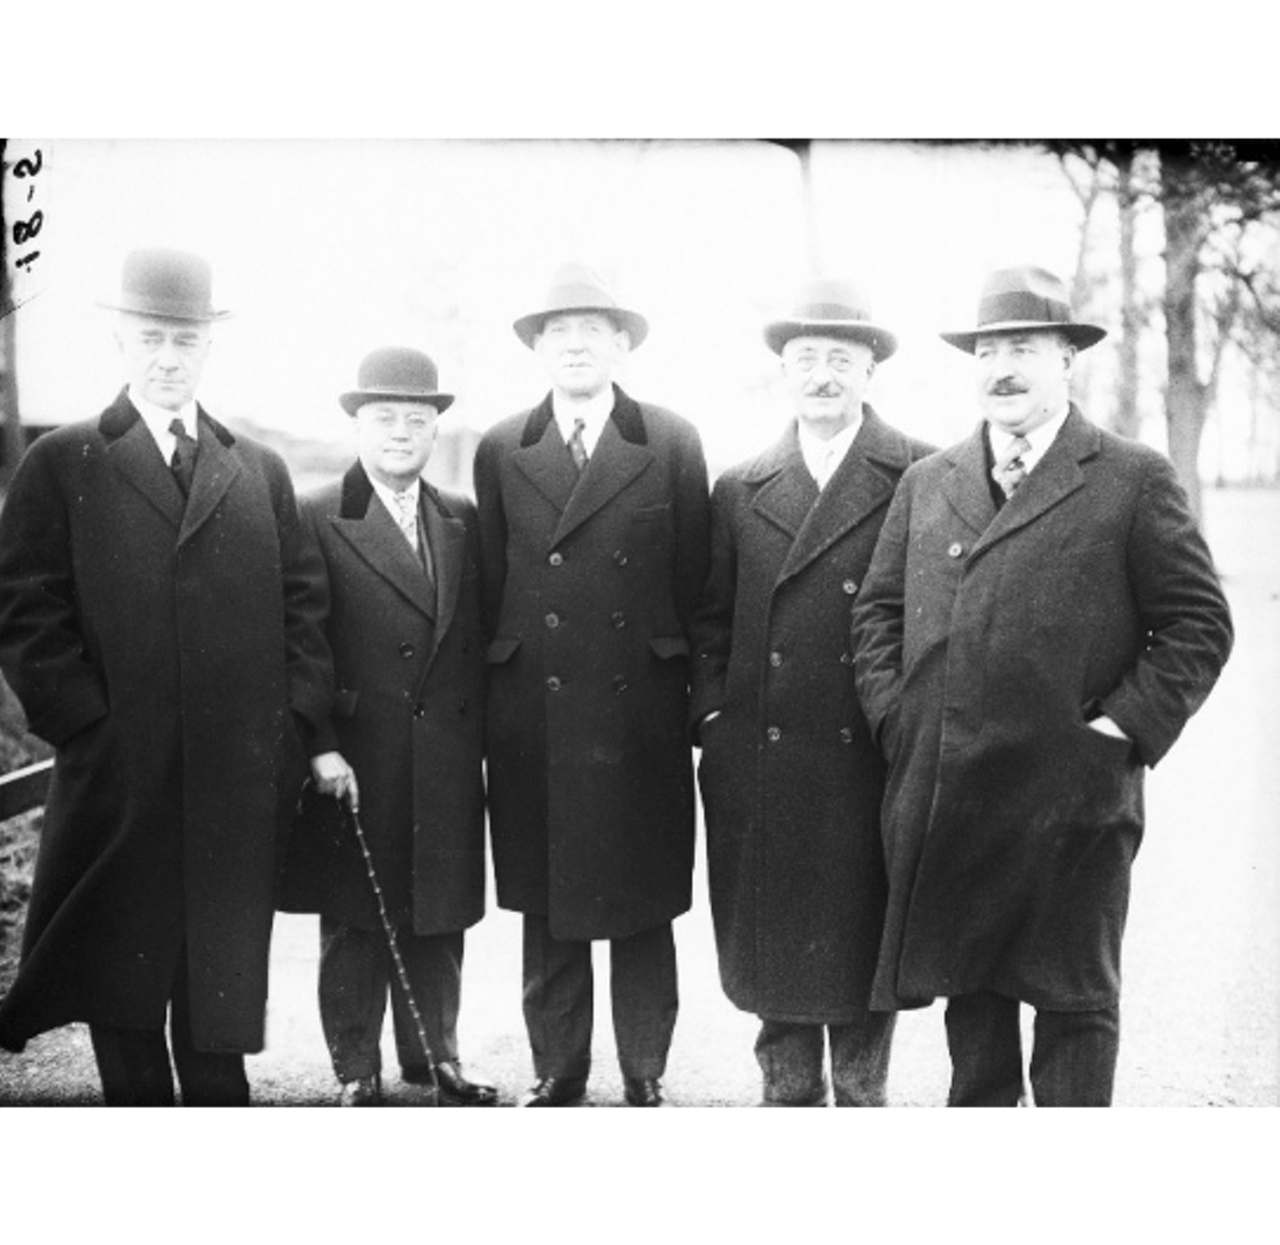 Group portrait of members of the Detroit Zoo Commission (circa 1929)